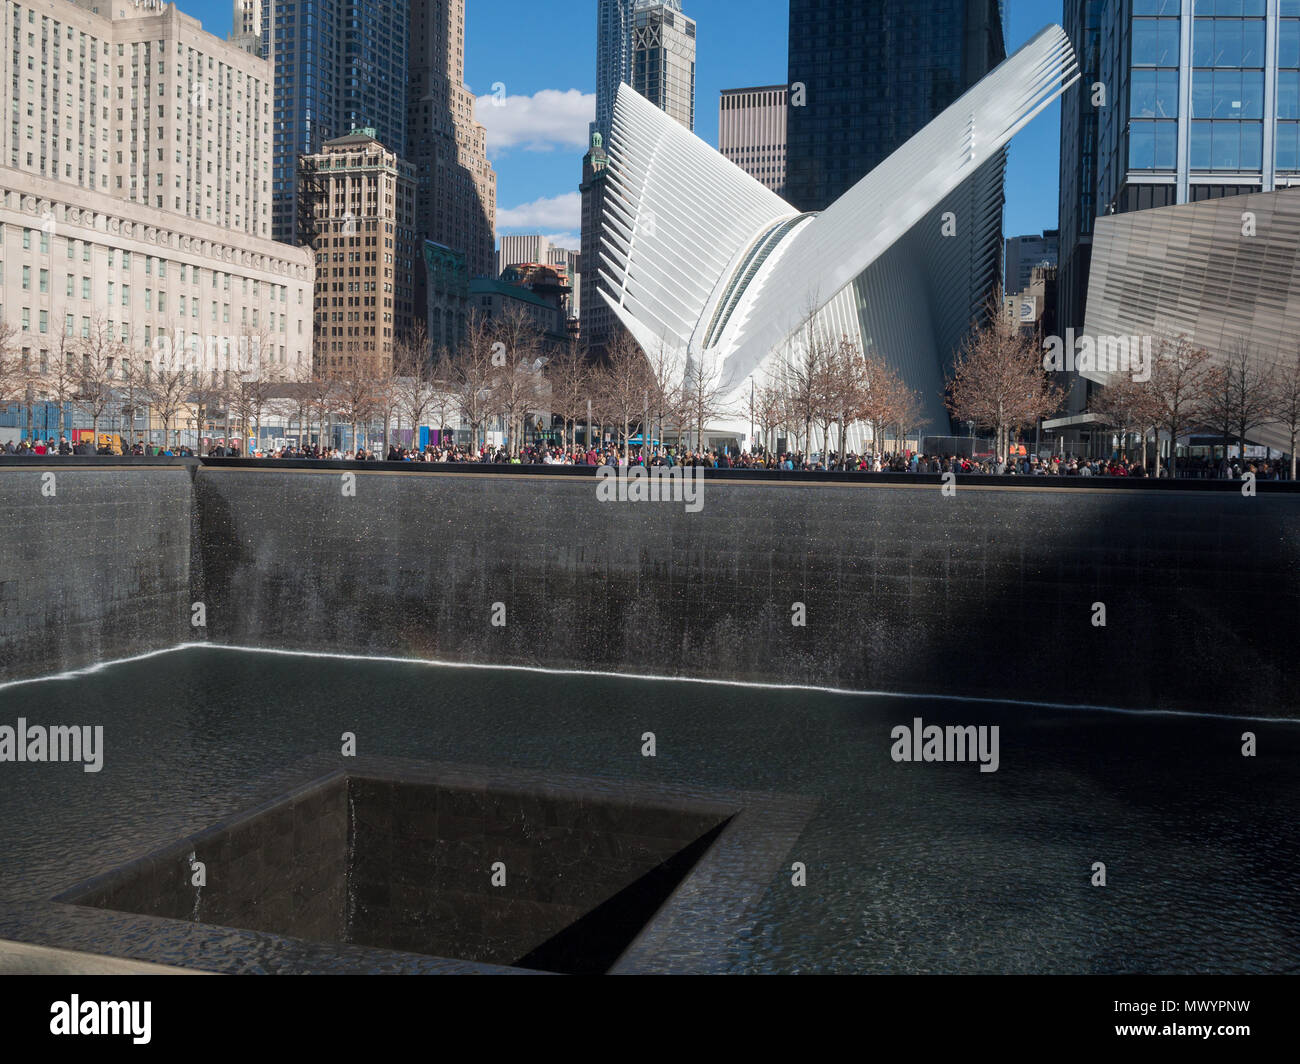 The 911 Memorial and the Oculus Stock Photo